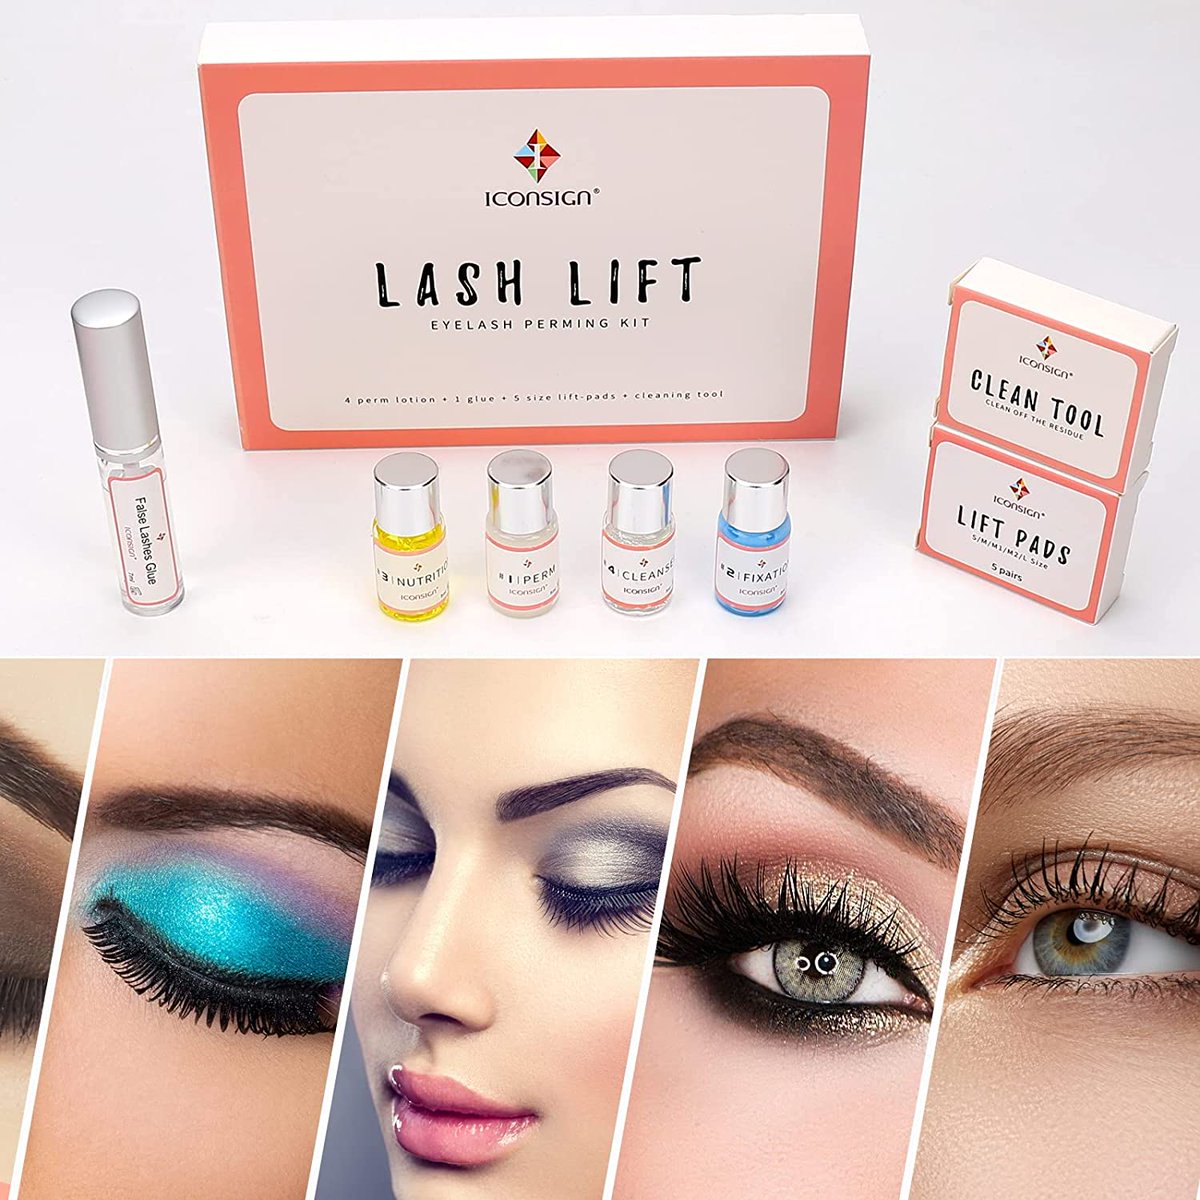 Enjoy beautifully curled lashes at the comfort of your home with eyelash perm kit #TryIt #EasyToUse amzn.to/3IR8sOq